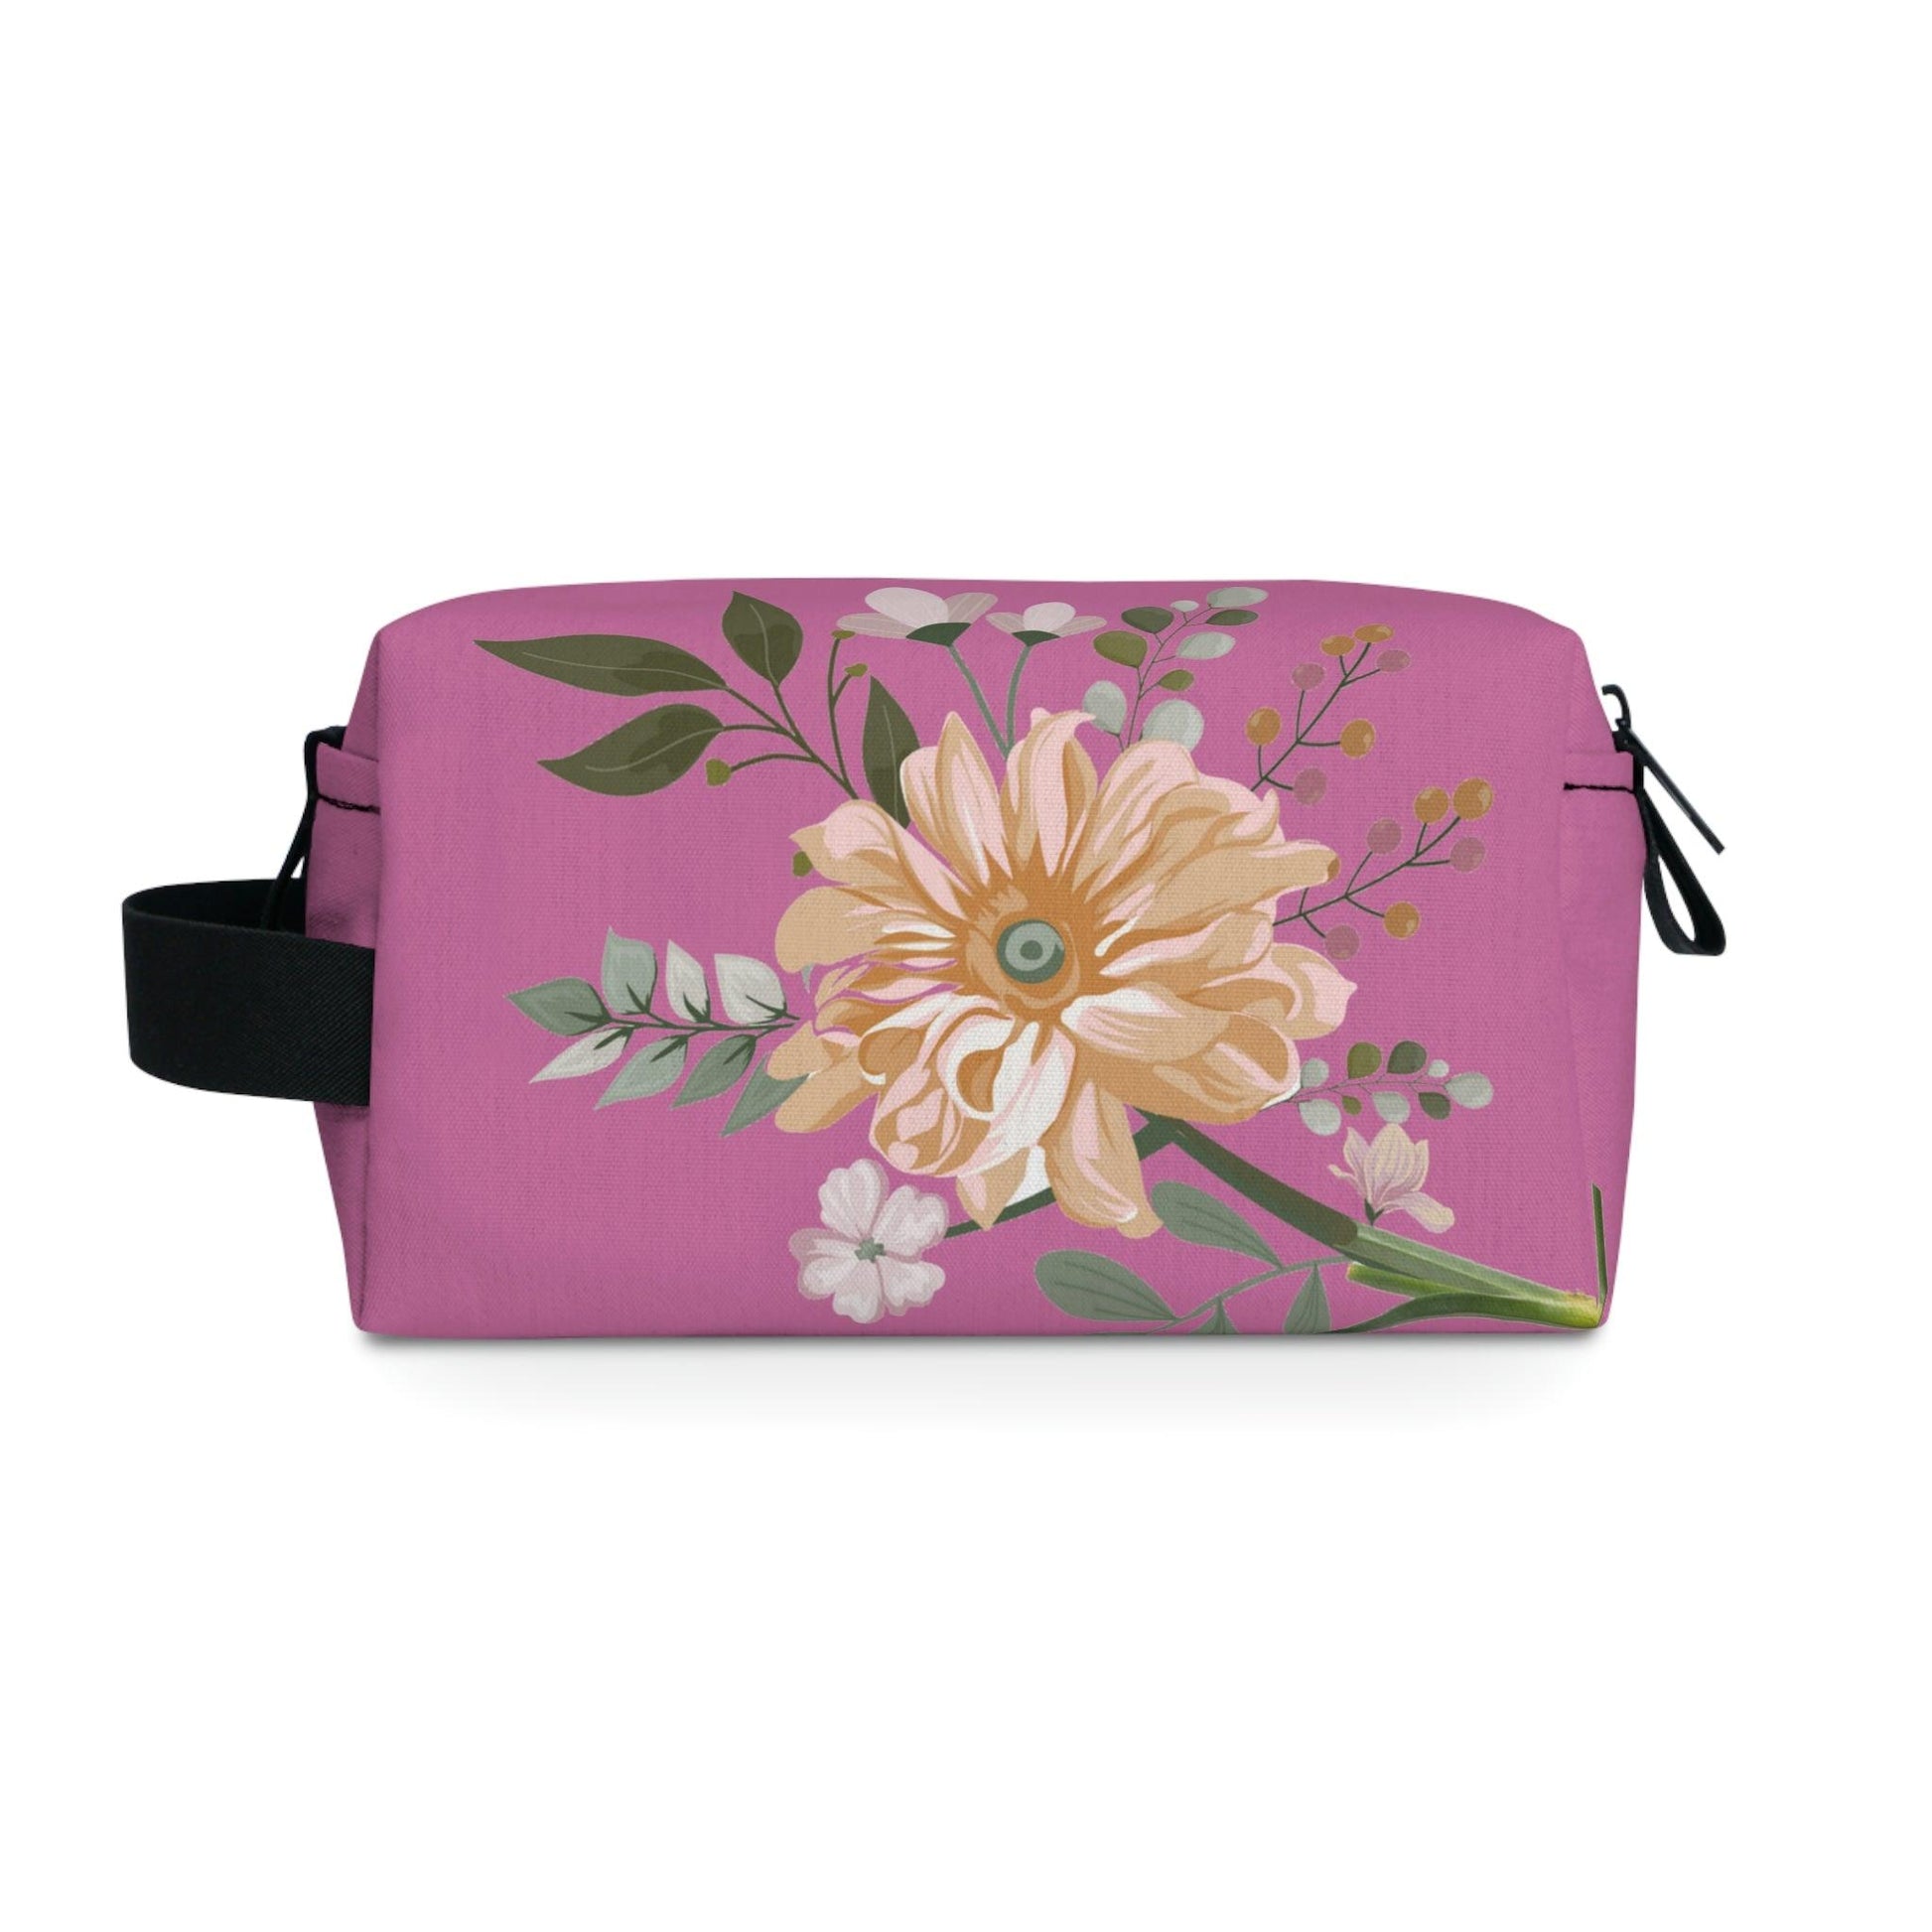 Makeup Bags Cosmetic Bag | Floral Makeup Bag - floral Toiletry Bag | makeup pouch gift for her | bridal party bags | travel bag - Giftsmojo